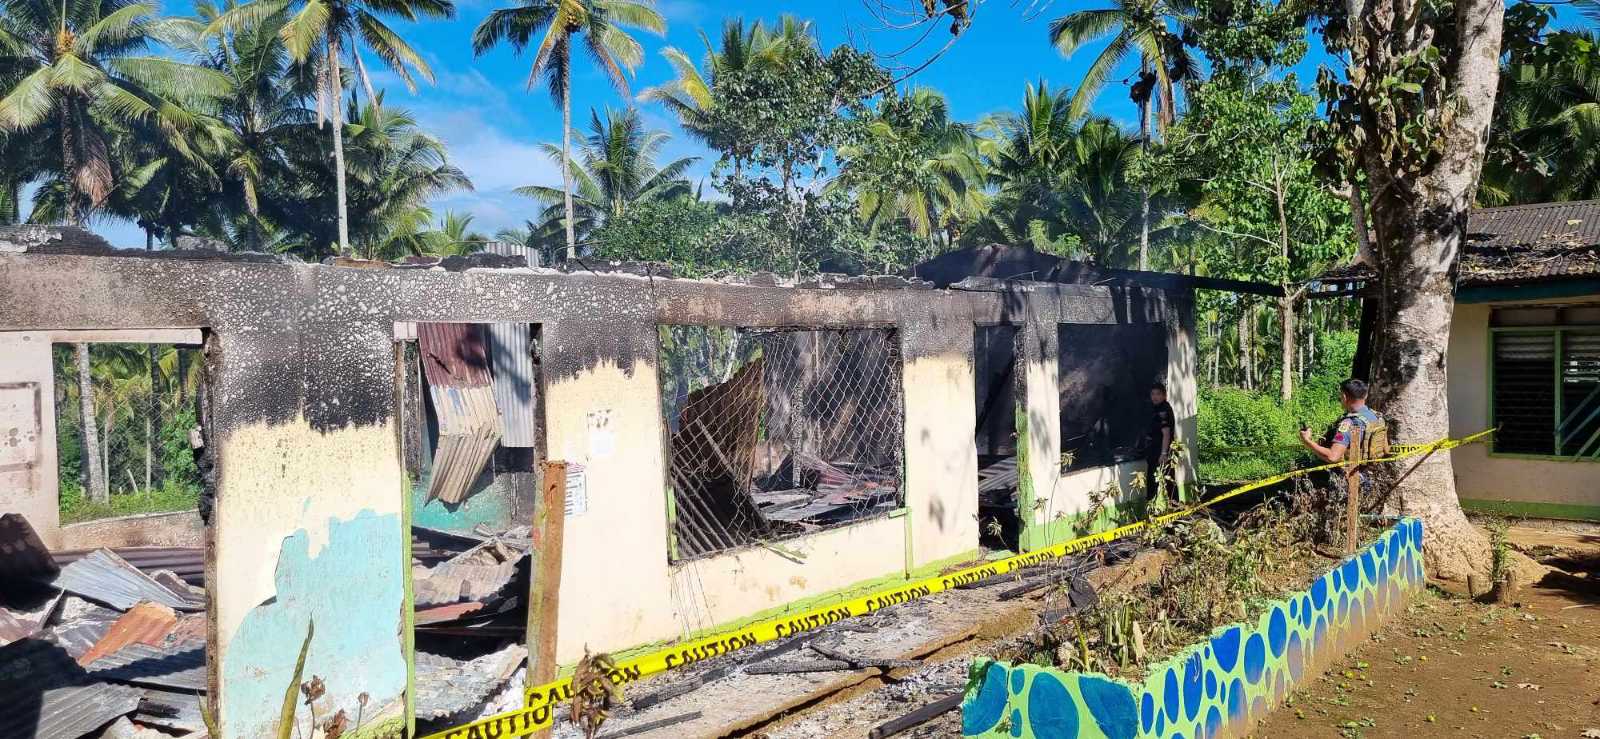 A Fire Officer of the Bureau of Fire Protection of Kauswagan, Lanao del Norte examines a building of Poona Piagapo Central Elementary School that was gutted by fire on Saturday. (Contributed photo) Two schools in Mindanao catch fire